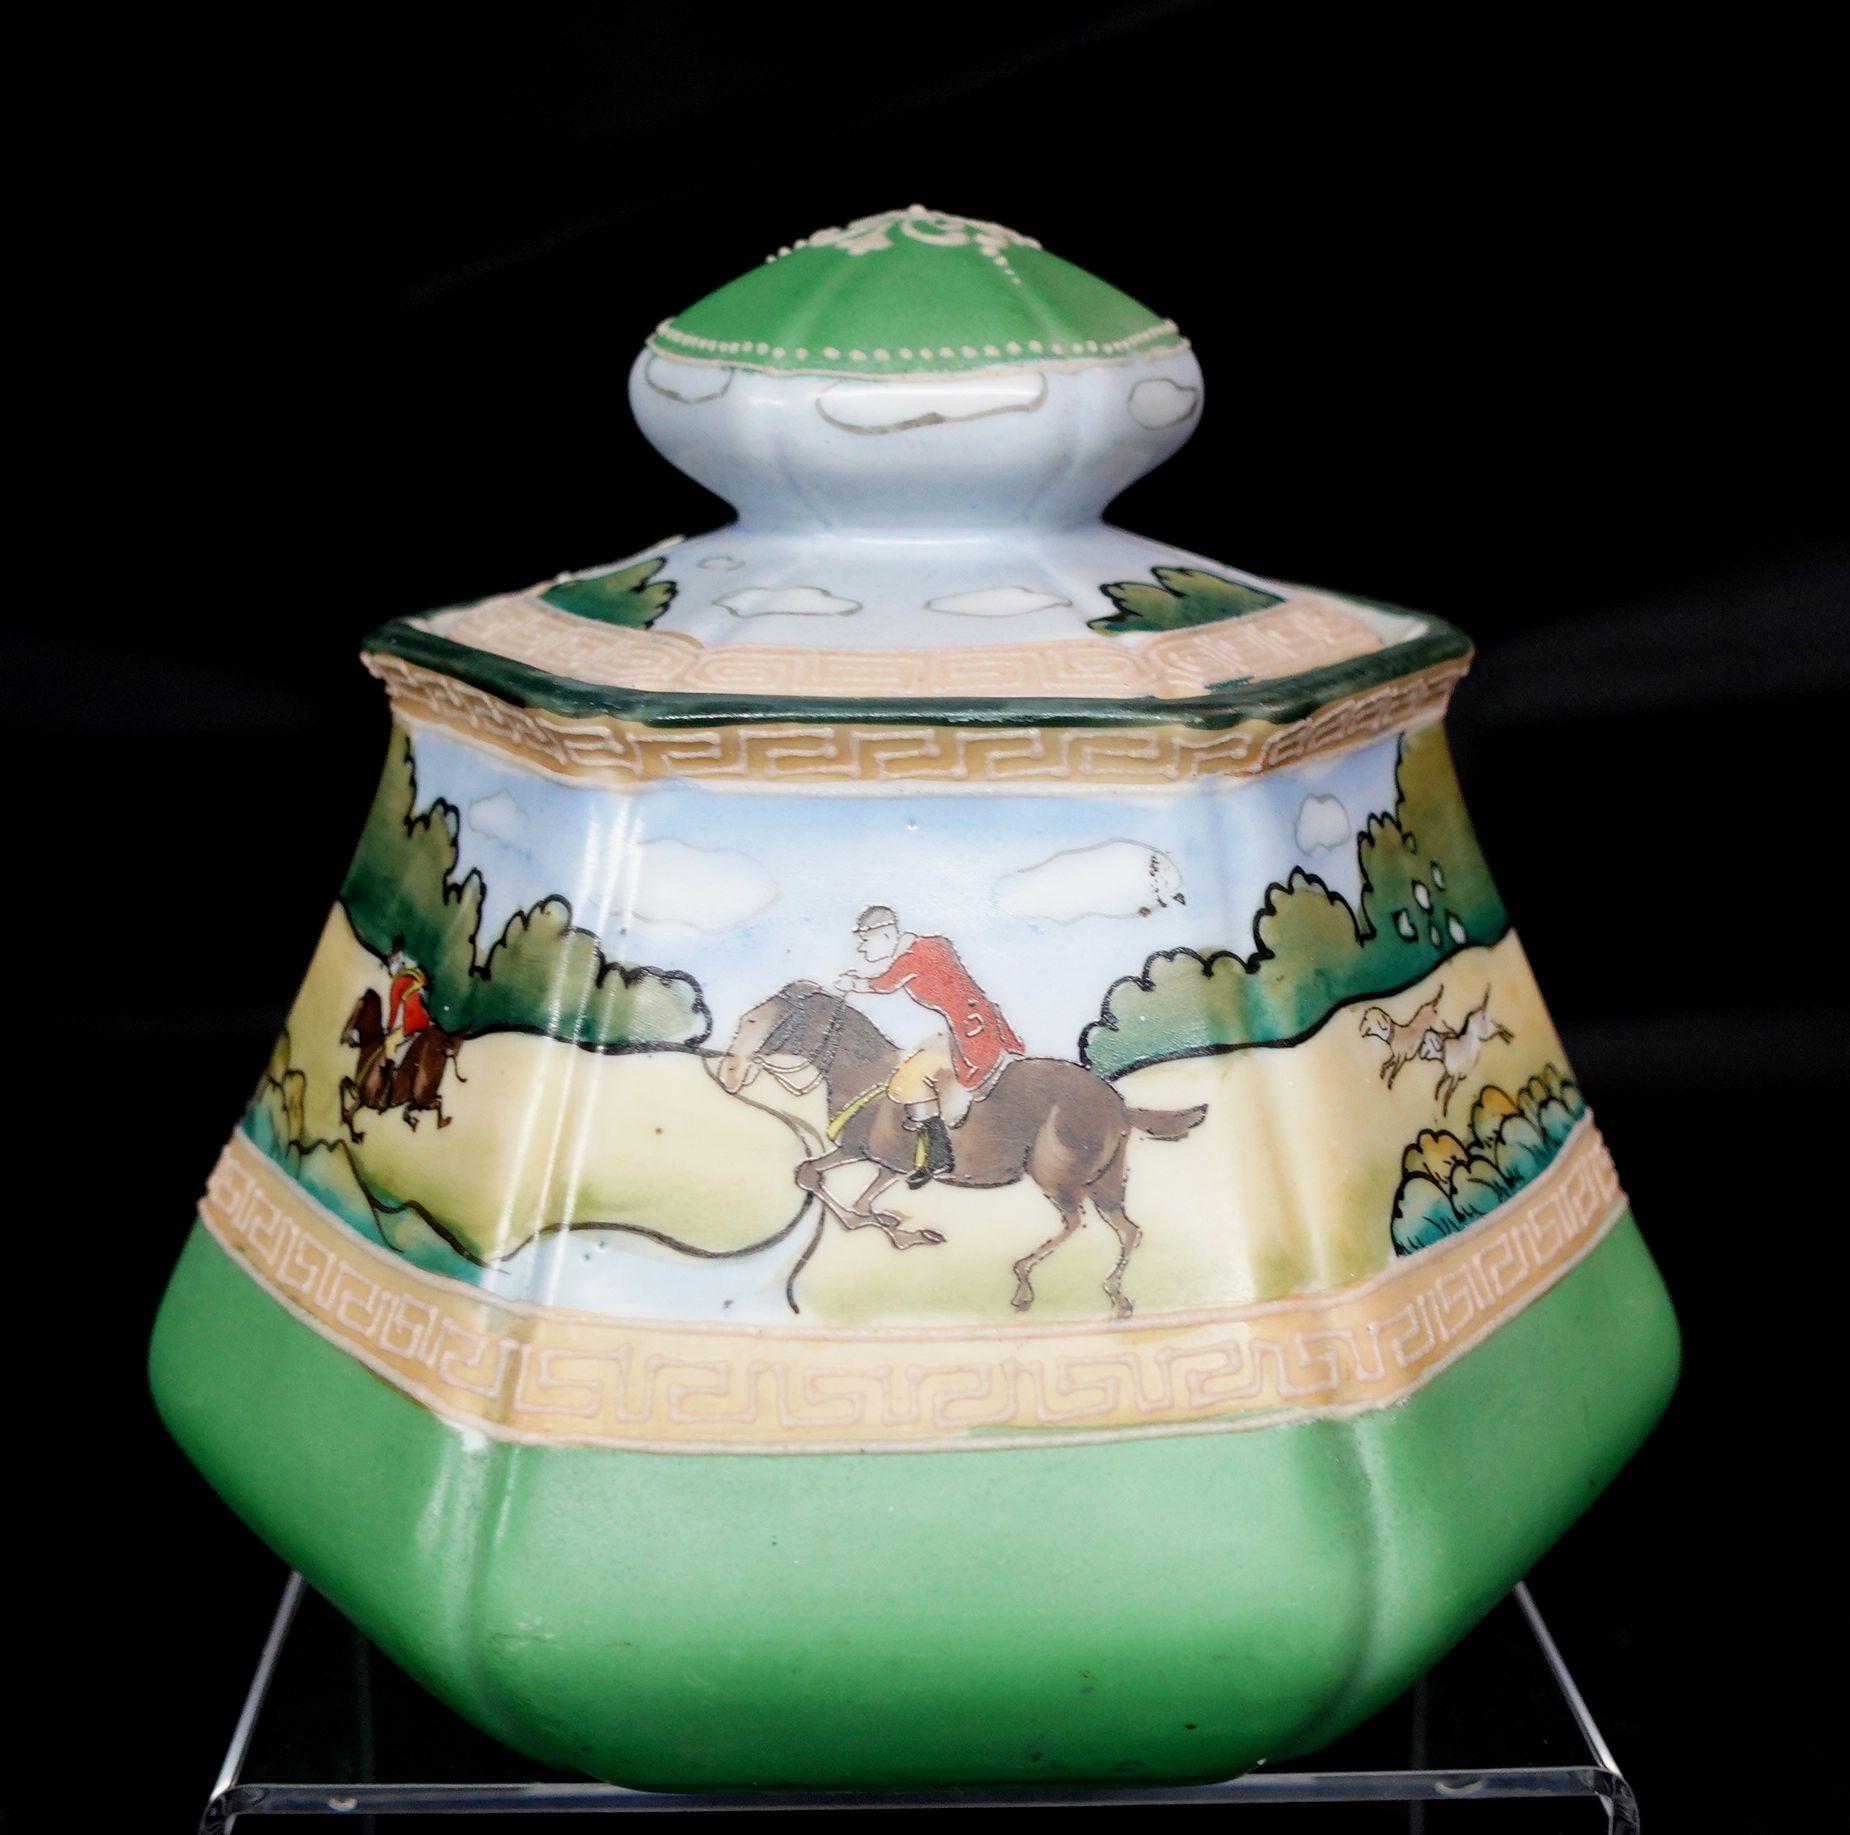 Antique 1900s Nippon Moriage hexagonal humidor with English Hunt Scene, hand-painted signed and marked at the bottom.
   